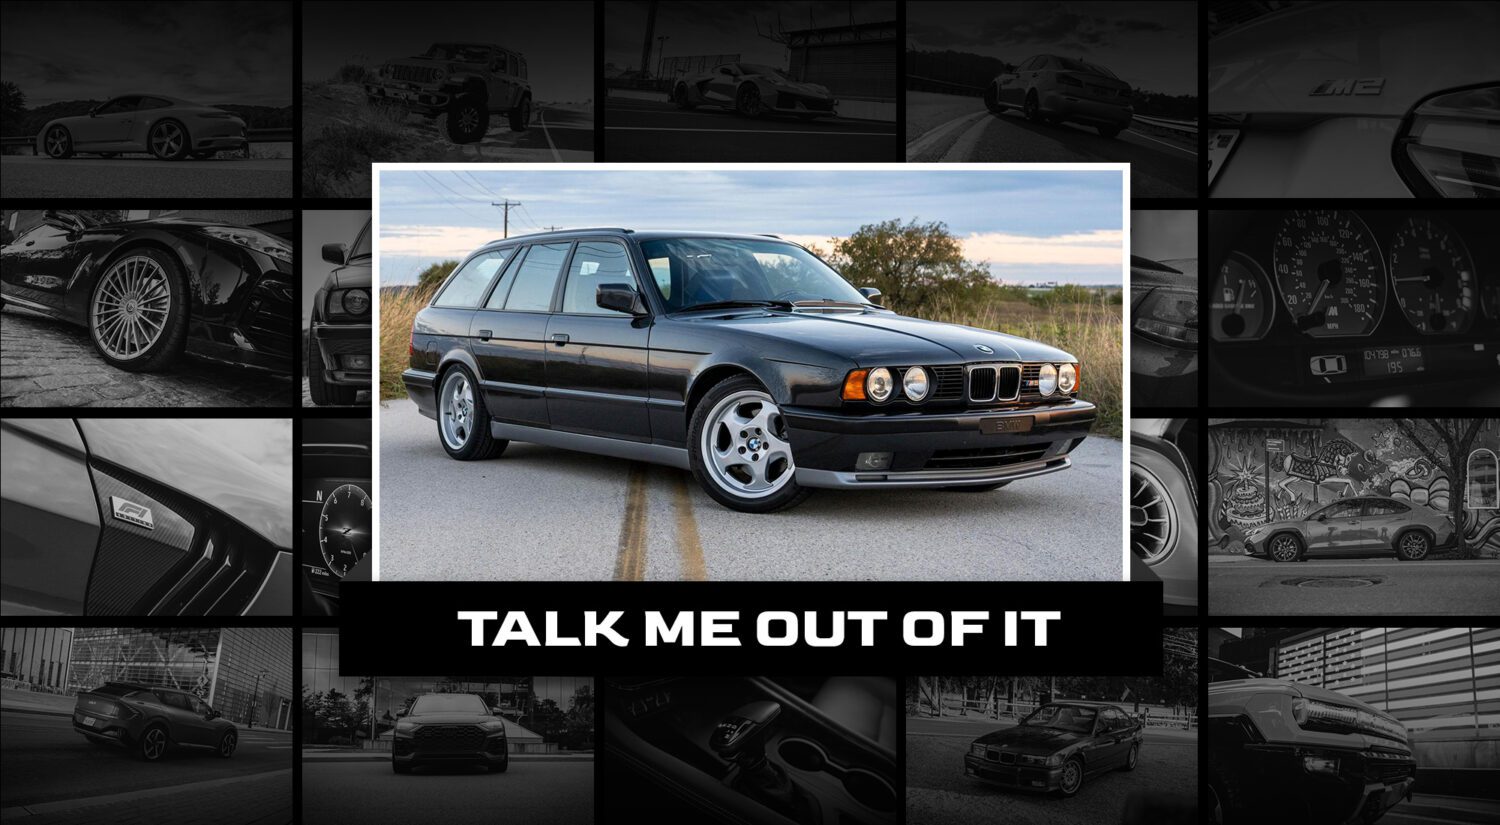 The BMW E34 M5 Touring makes you pay for exclusivity